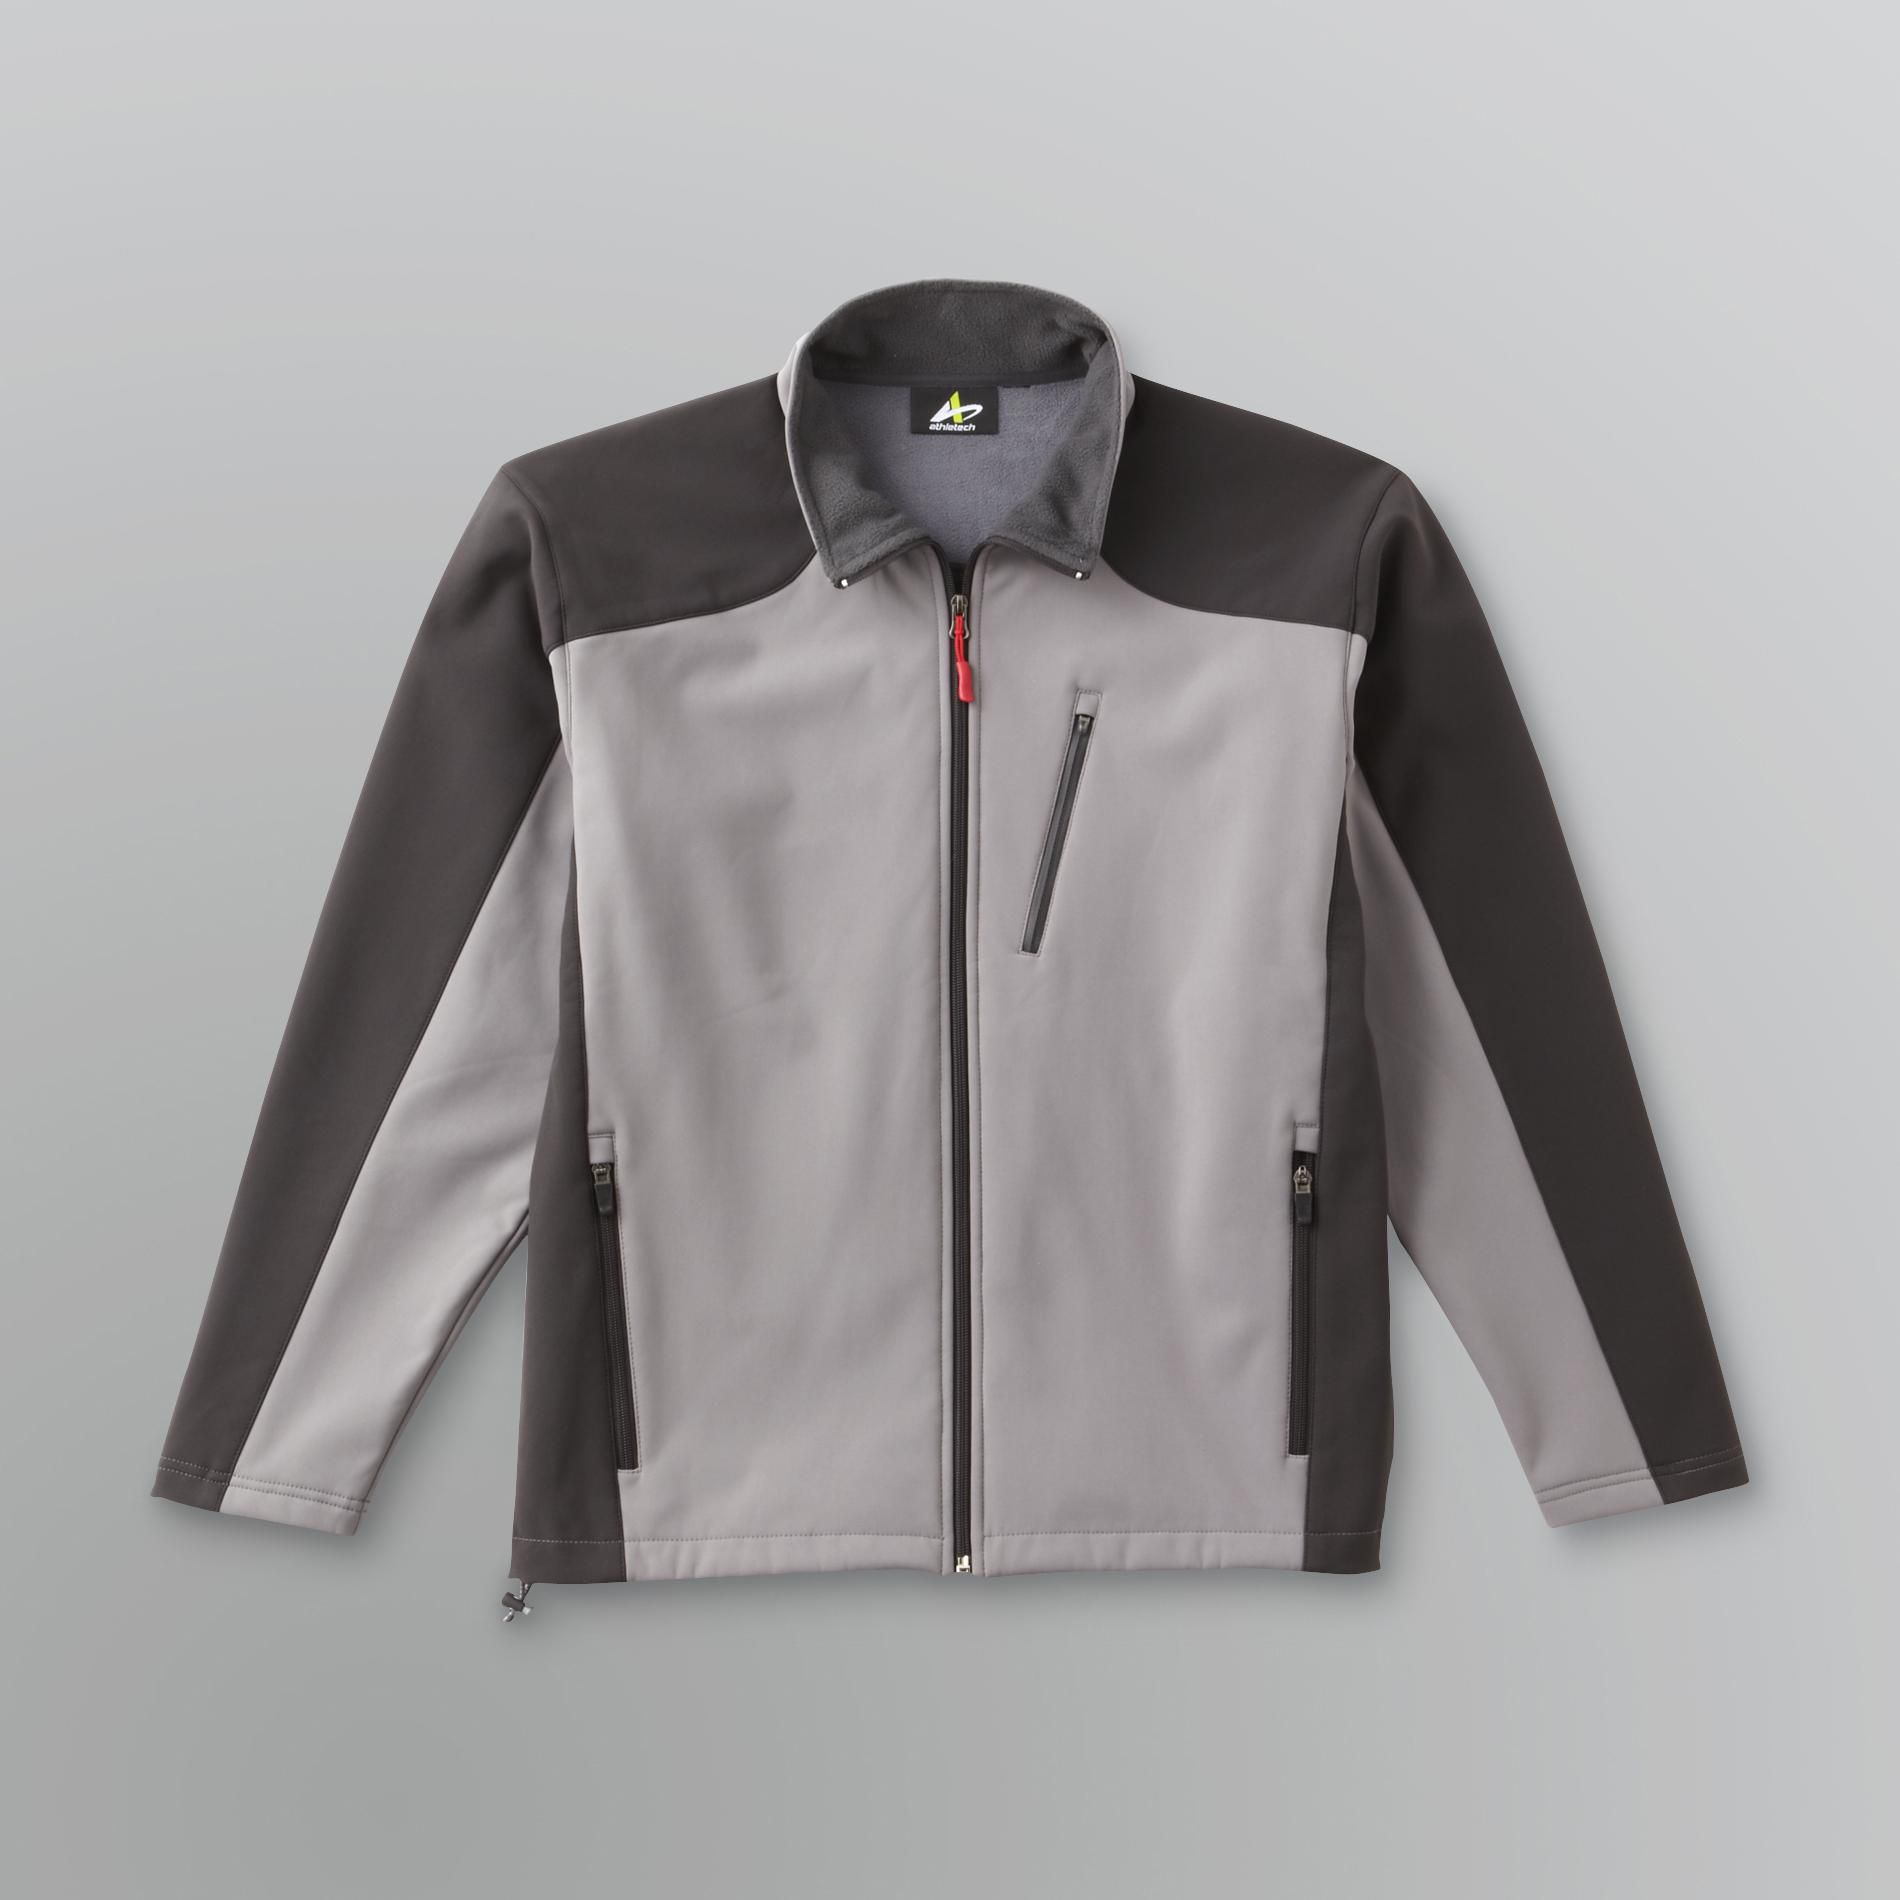 Athletech Men's Softshell Jacket - Water Resistant